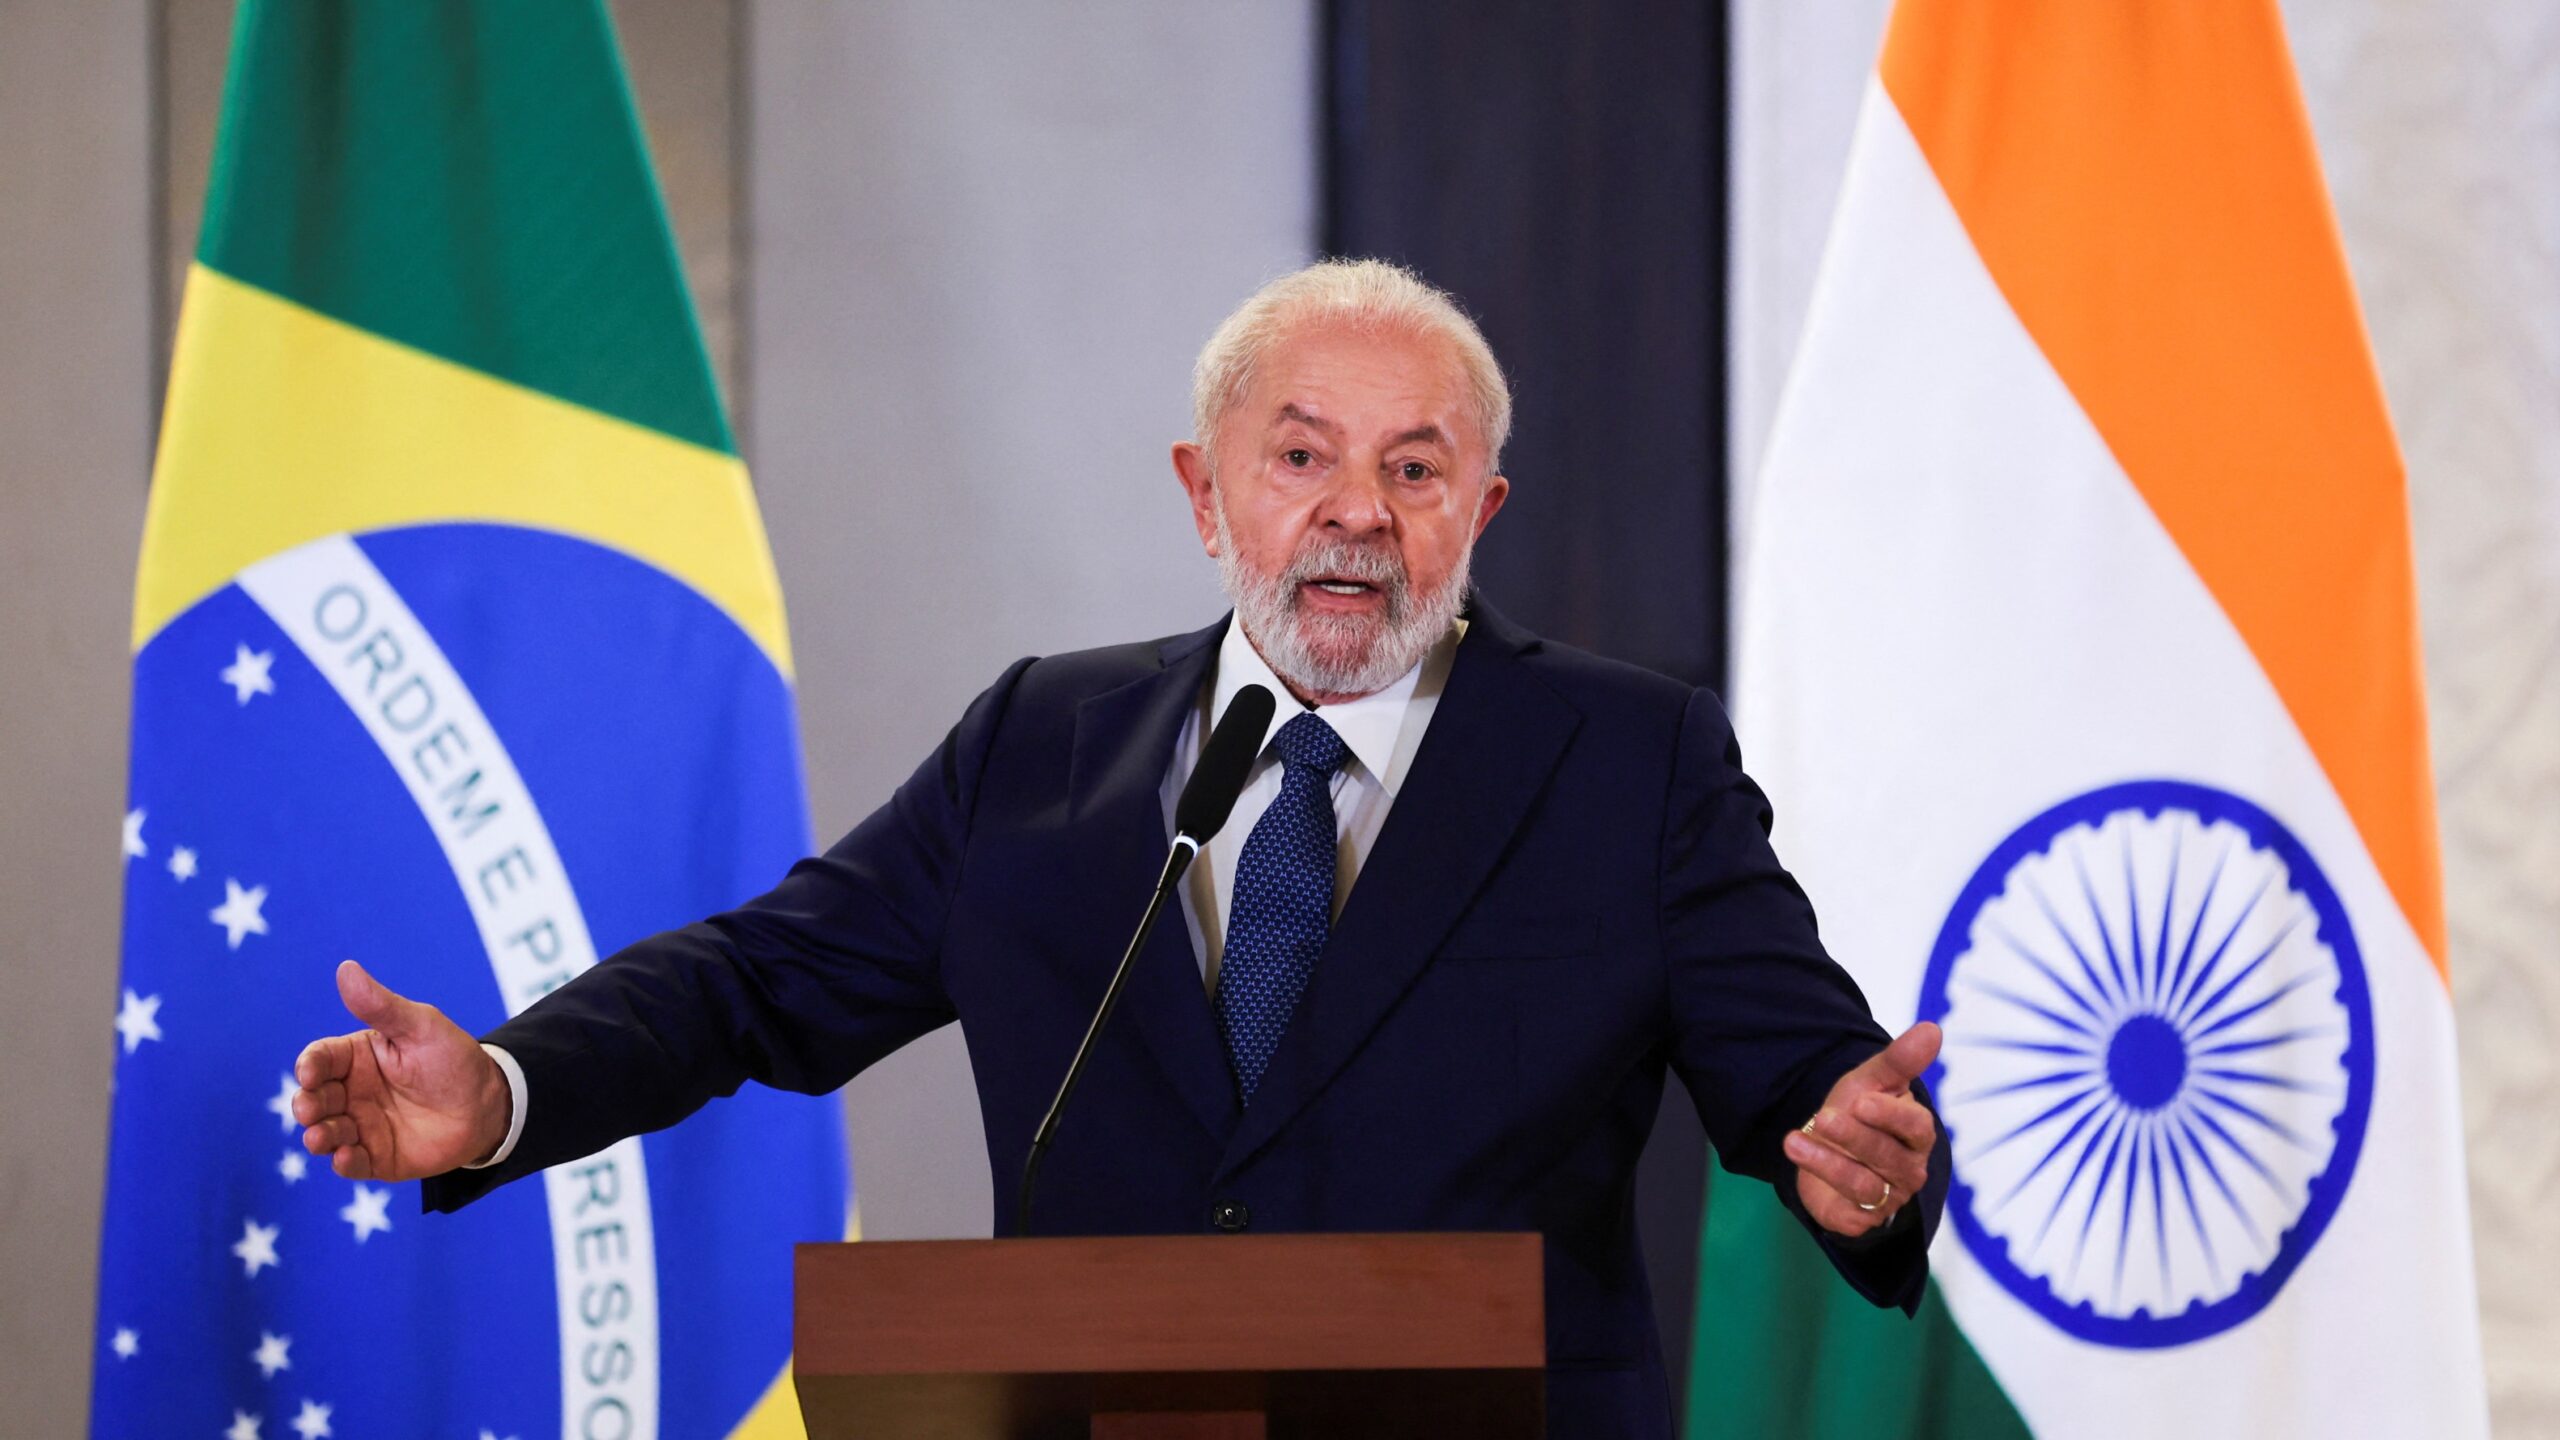 Brazil’s ICC Membership and Putin Relations: Viewpoints from Lula